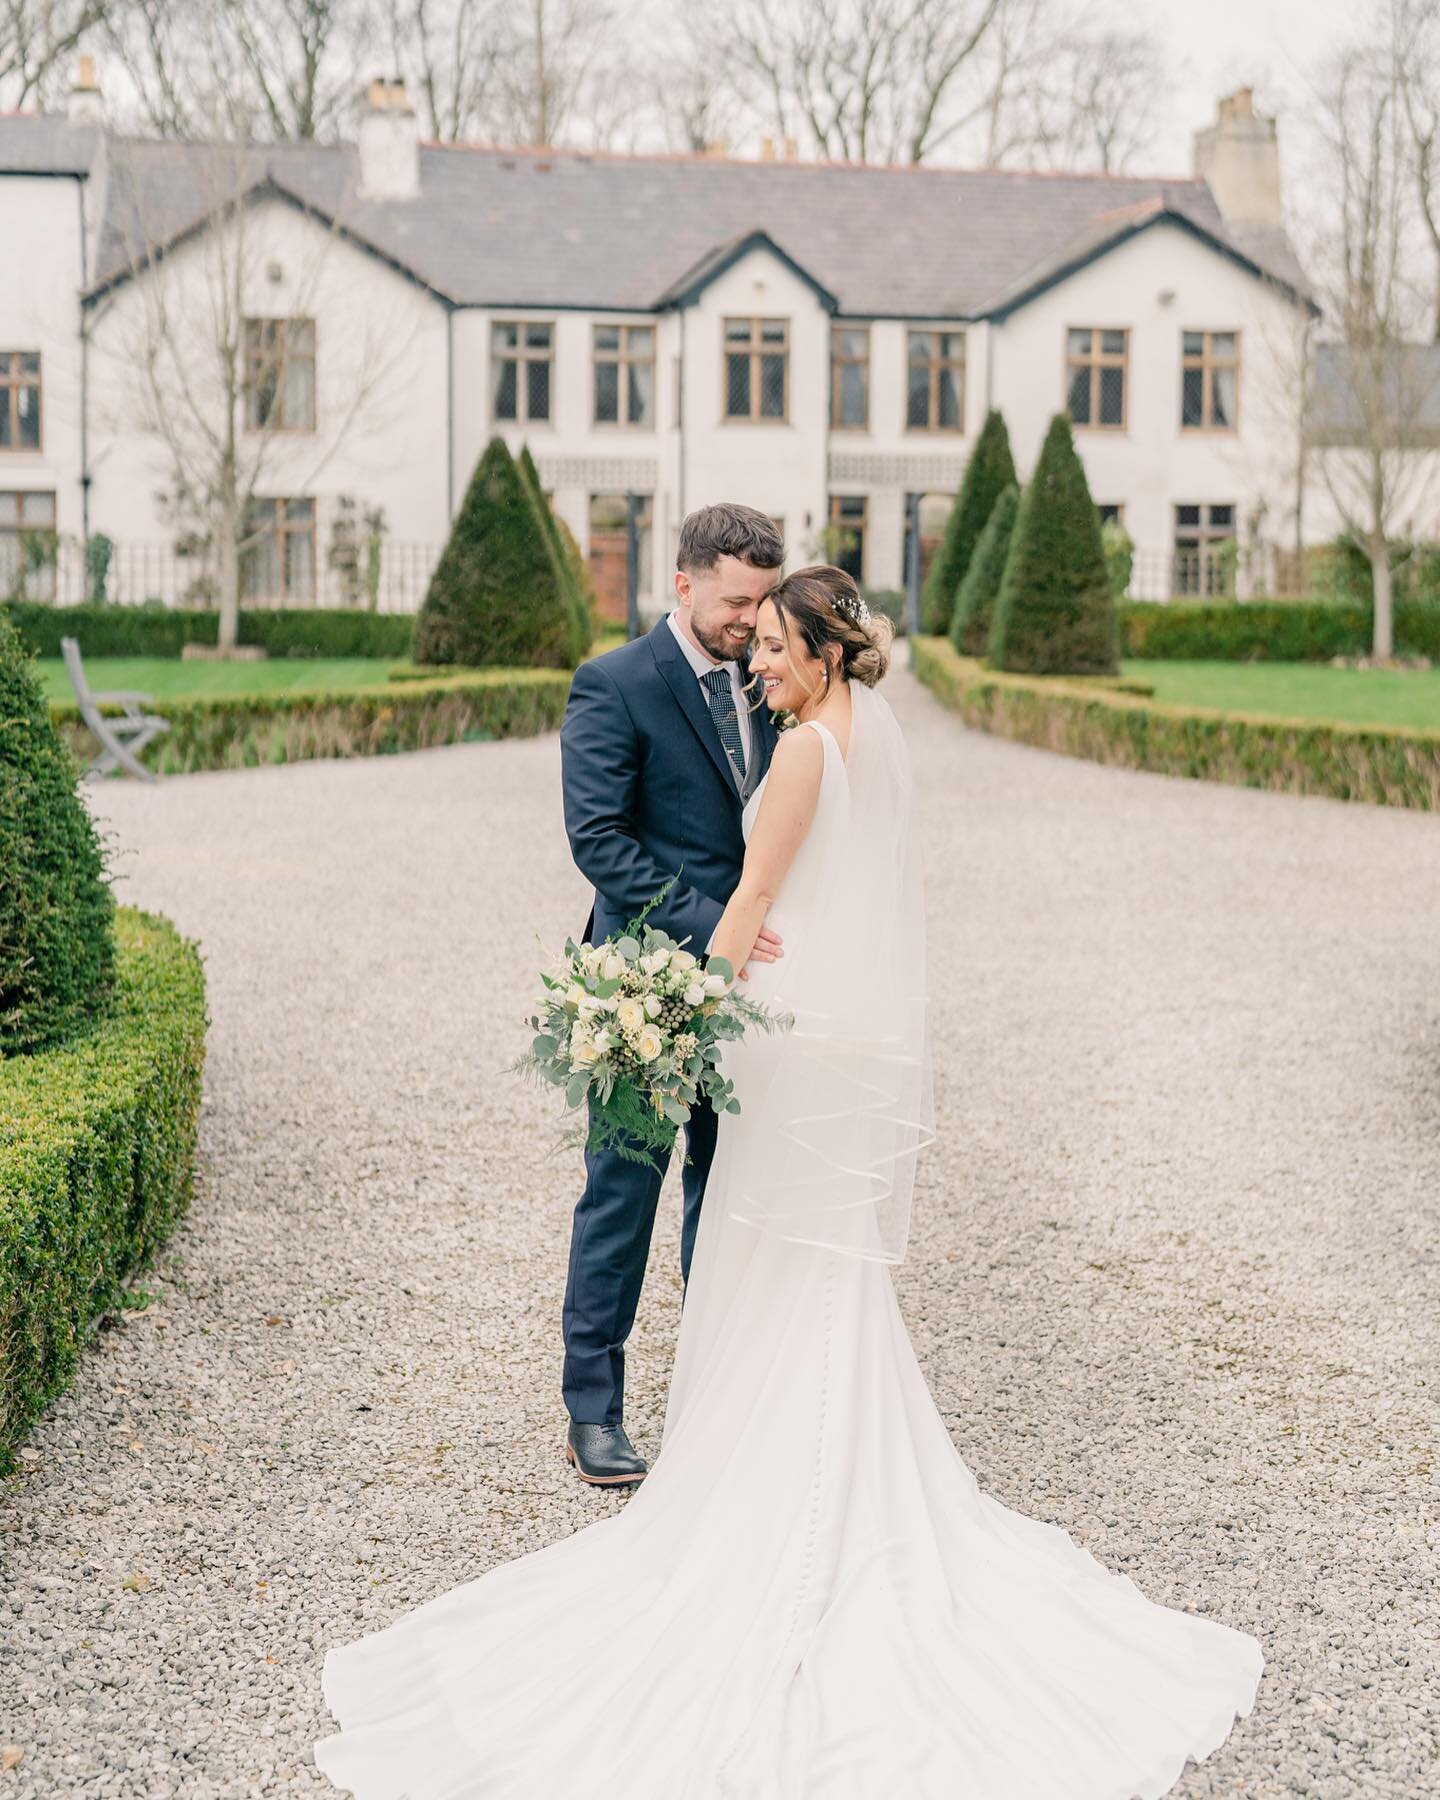 FINALLY finding 5 minutes after the Easter bank holiday to post this lovely preview from @colleenbro91 &amp; @ajwilcock23&rsquo;s wedding day at the @riverbarnweddings ✨

My first visit to the river barns did not disappoint! I was so stoked when coll